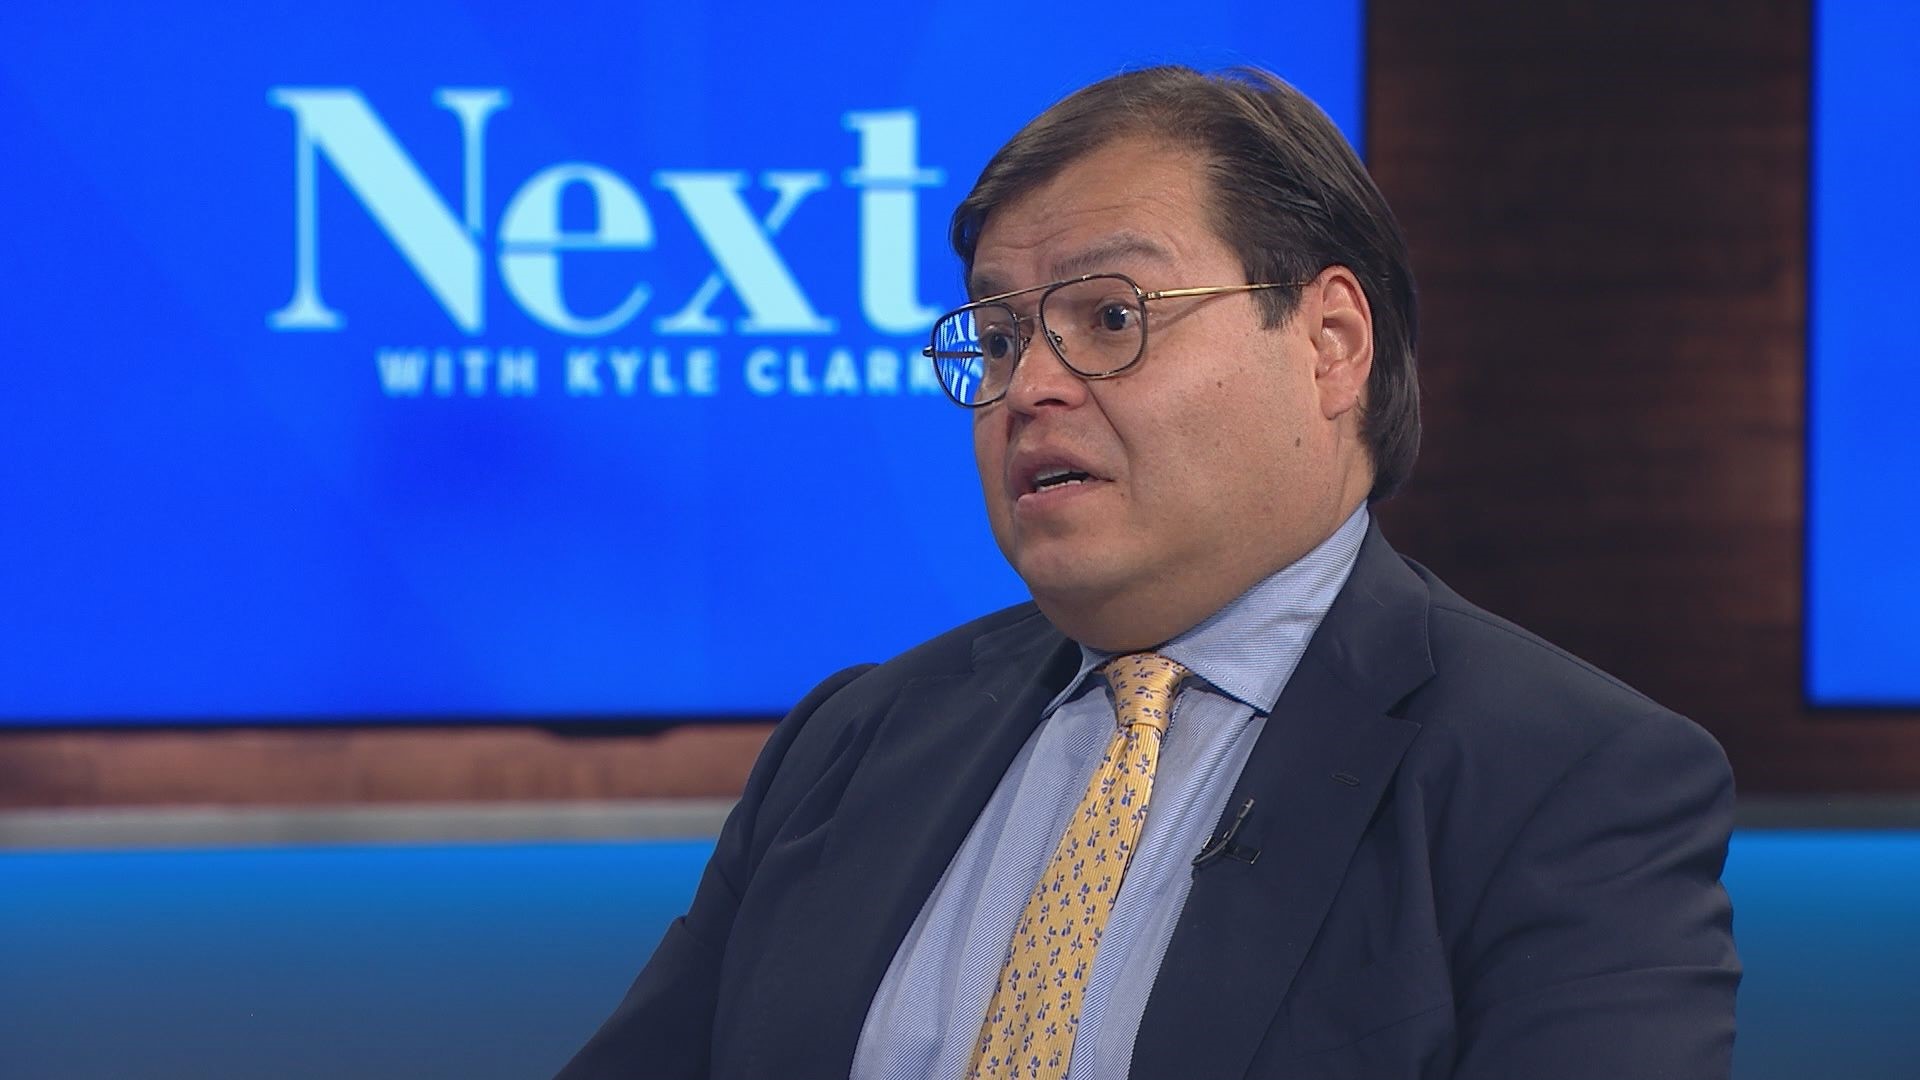 Trinidad Rodriguez told Kyle about a field hospital he'd set up for 1,000 unhoused people, as well as control of DPS, policing and other hot topics in the race.